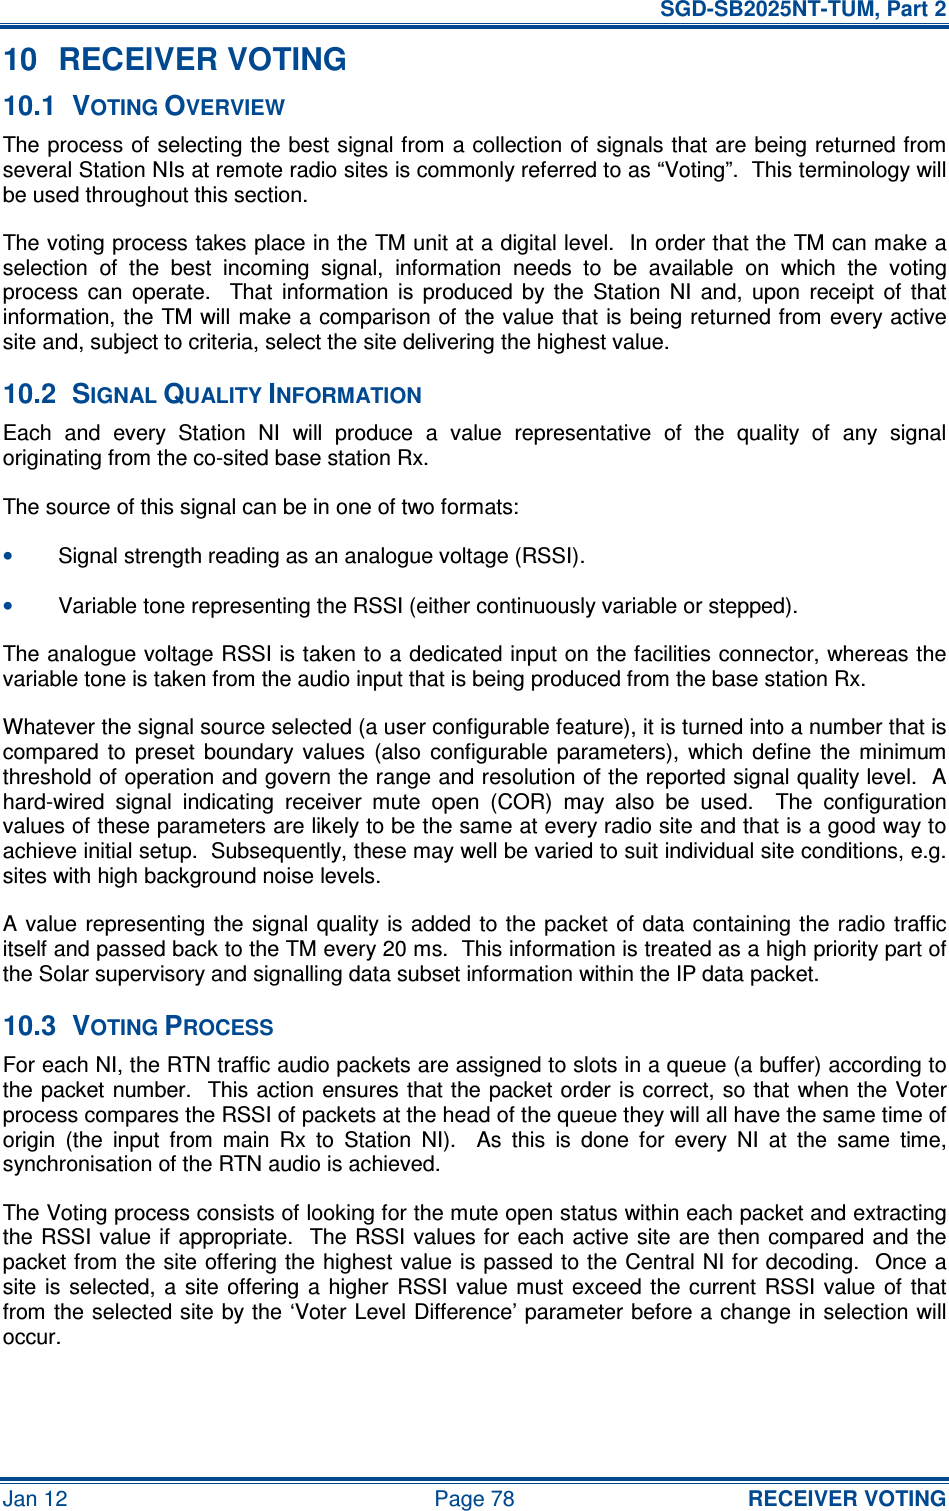   SGD-SB2025NT-TUM, Part 2 Jan 12  Page 78 RECEIVER VOTING 10  RECEIVER VOTING 10.1  VOTING OVERVIEW The process of selecting the best signal from a collection of signals that are being returned from several Station NIs at remote radio sites is commonly referred to as “Voting”.  This terminology will be used throughout this section. The voting process takes place in the TM unit at a digital level.  In order that the TM can make a selection  of  the  best  incoming  signal,  information  needs  to  be  available  on  which  the  voting process  can  operate.    That  information  is  produced  by  the  Station  NI  and,  upon  receipt  of  that information, the TM will  make a comparison of the value that is being returned from every active site and, subject to criteria, select the site delivering the highest value. 10.2  SIGNAL QUALITY INFORMATION Each  and  every  Station  NI  will  produce  a  value  representative  of  the  quality  of  any  signal originating from the co-sited base station Rx. The source of this signal can be in one of two formats: • Signal strength reading as an analogue voltage (RSSI). • Variable tone representing the RSSI (either continuously variable or stepped). The analogue voltage RSSI is taken to a dedicated input on the facilities connector, whereas the variable tone is taken from the audio input that is being produced from the base station Rx. Whatever the signal source selected (a user configurable feature), it is turned into a number that is compared  to  preset  boundary  values  (also  configurable  parameters),  which  define  the  minimum threshold of operation and govern the range and resolution of the reported signal quality level.  A hard-wired  signal  indicating  receiver  mute  open  (COR)  may  also  be  used.    The  configuration values of these parameters are likely to be the same at every radio site and that is a good way to achieve initial setup.  Subsequently, these may well be varied to suit individual site conditions, e.g. sites with high background noise levels. A value representing the signal quality is added  to the  packet  of  data containing the radio traffic itself and passed back to the TM every 20 ms.  This information is treated as a high priority part of the Solar supervisory and signalling data subset information within the IP data packet. 10.3  VOTING PROCESS For each NI, the RTN traffic audio packets are assigned to slots in a queue (a buffer) according to the packet number.  This action ensures that the packet order is correct, so that when the Voter process compares the RSSI of packets at the head of the queue they will all have the same time of origin  (the  input  from  main  Rx  to  Station  NI).    As  this  is  done  for  every  NI  at  the  same  time, synchronisation of the RTN audio is achieved. The Voting process consists of looking for the mute open status within each packet and extracting the RSSI  value if appropriate.  The RSSI values for each active site are then compared and the packet from the site offering the highest value is passed to the Central NI for decoding.  Once a site  is  selected, a  site offering  a  higher  RSSI  value must  exceed the  current RSSI  value  of  that from the selected site by the ‘Voter Level Difference’ parameter before a change in selection will occur. 